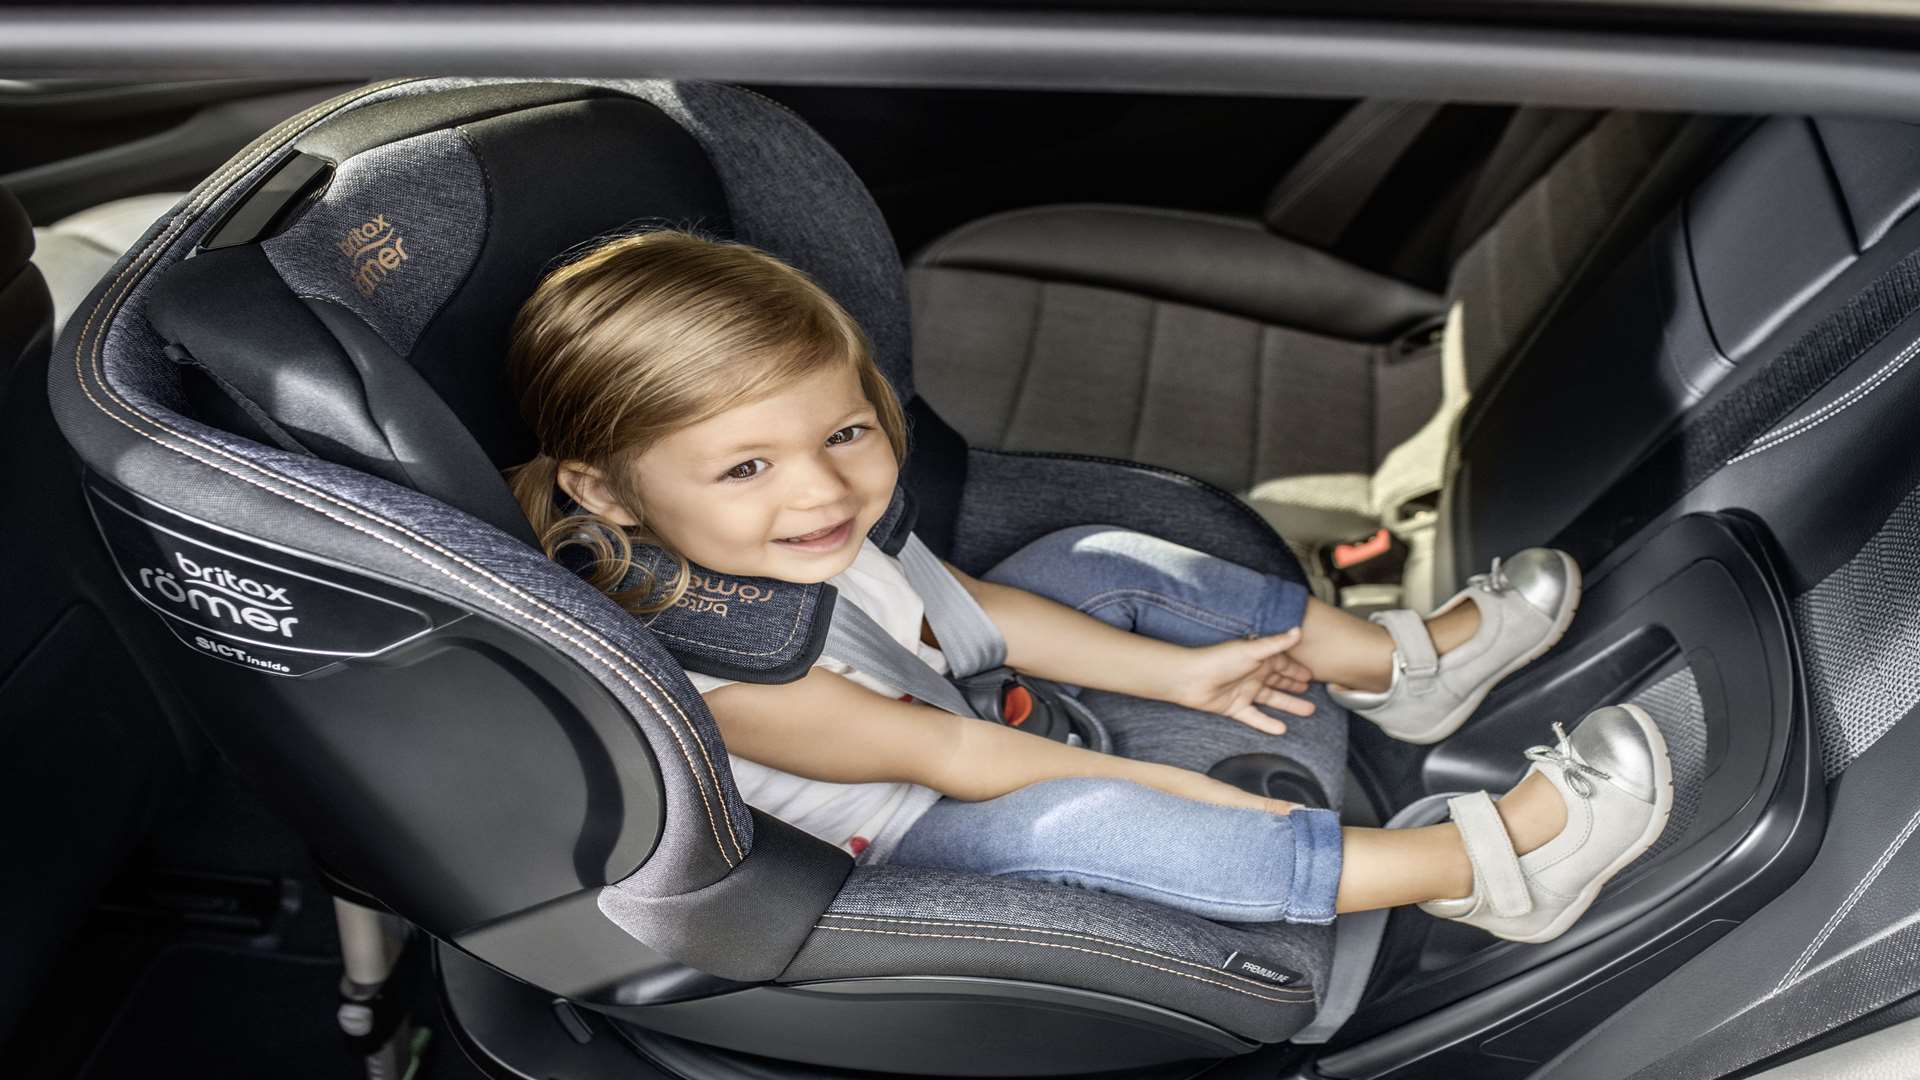 In theory, you can now buy one car seat that will take you all the way from leaving the hospital with a newborn, to age 12